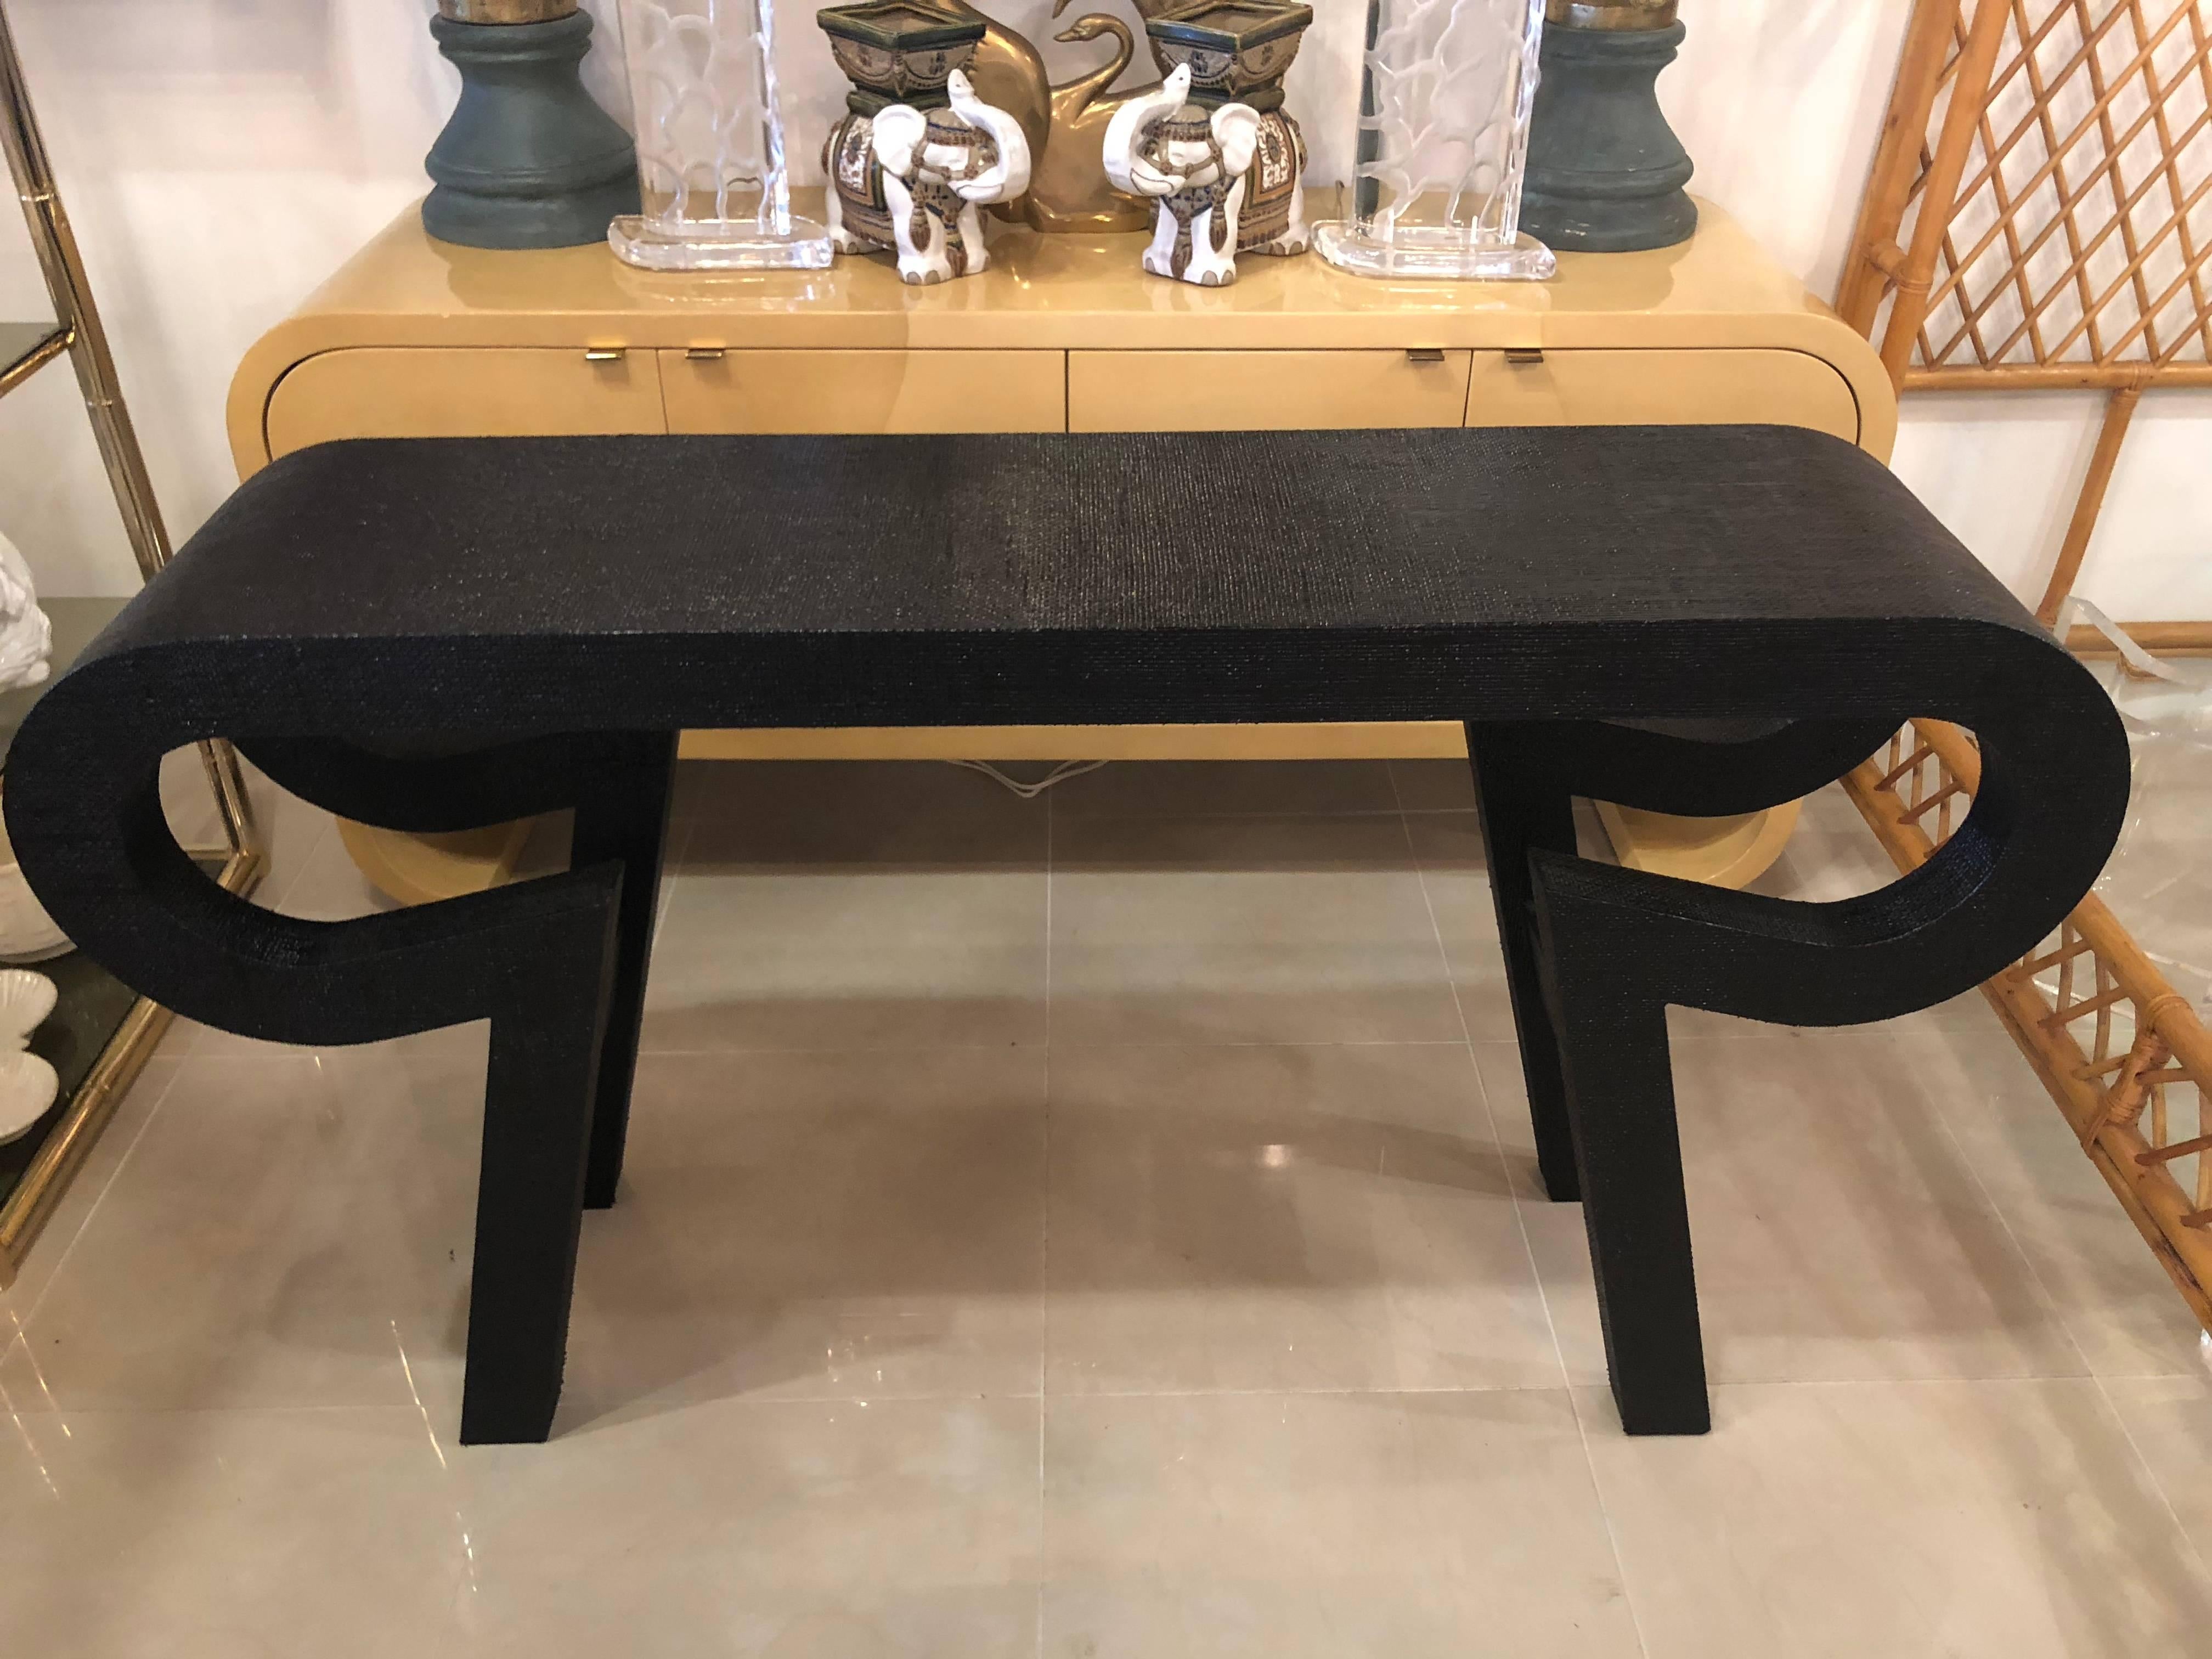 Vintage grasscloth console table lacquered in black. 